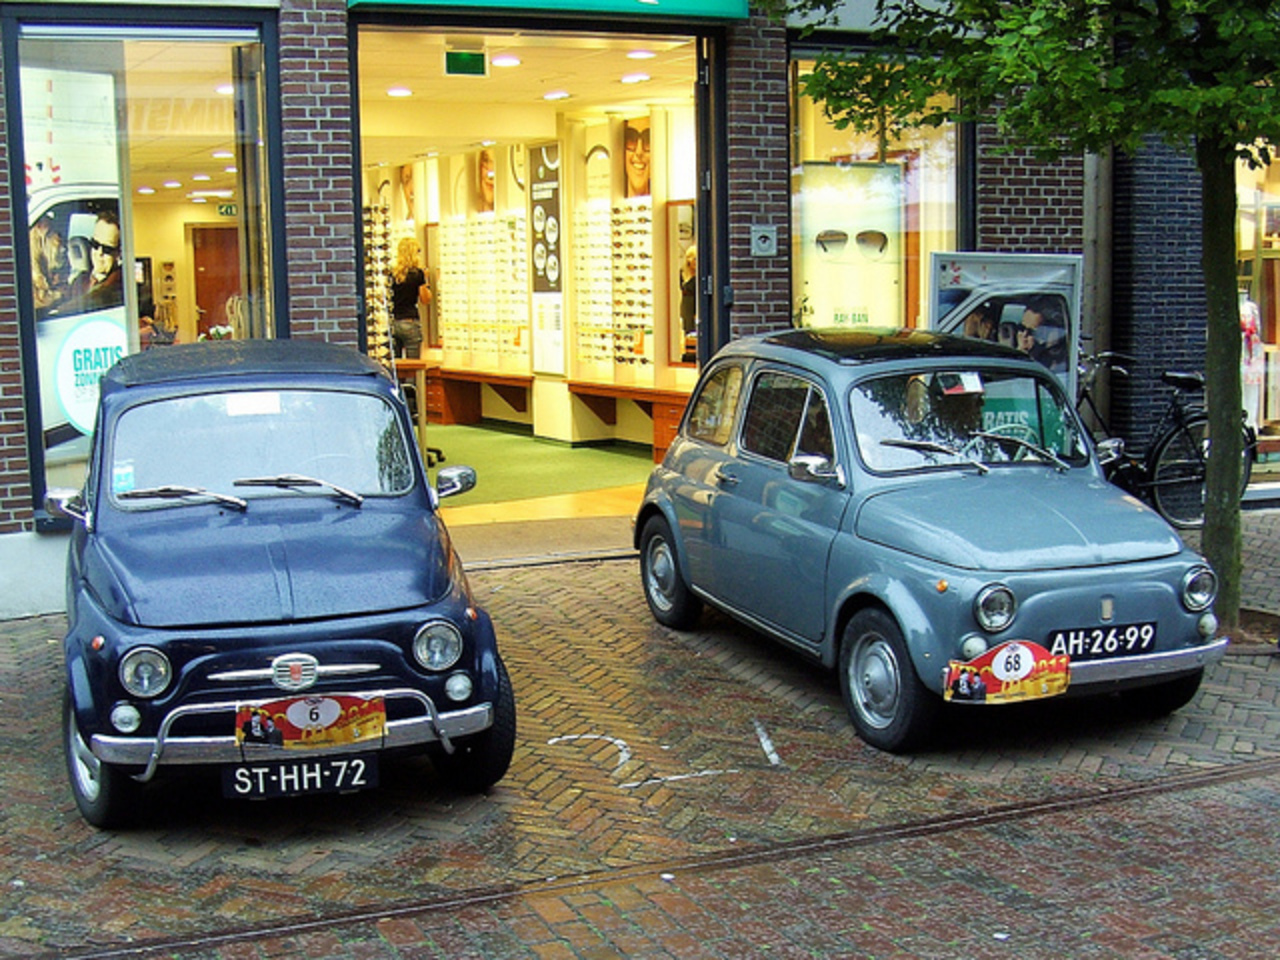 1974 Fiat 500R and 1966 Fiat Nuova 500 | Flickr - Photo Sharing!